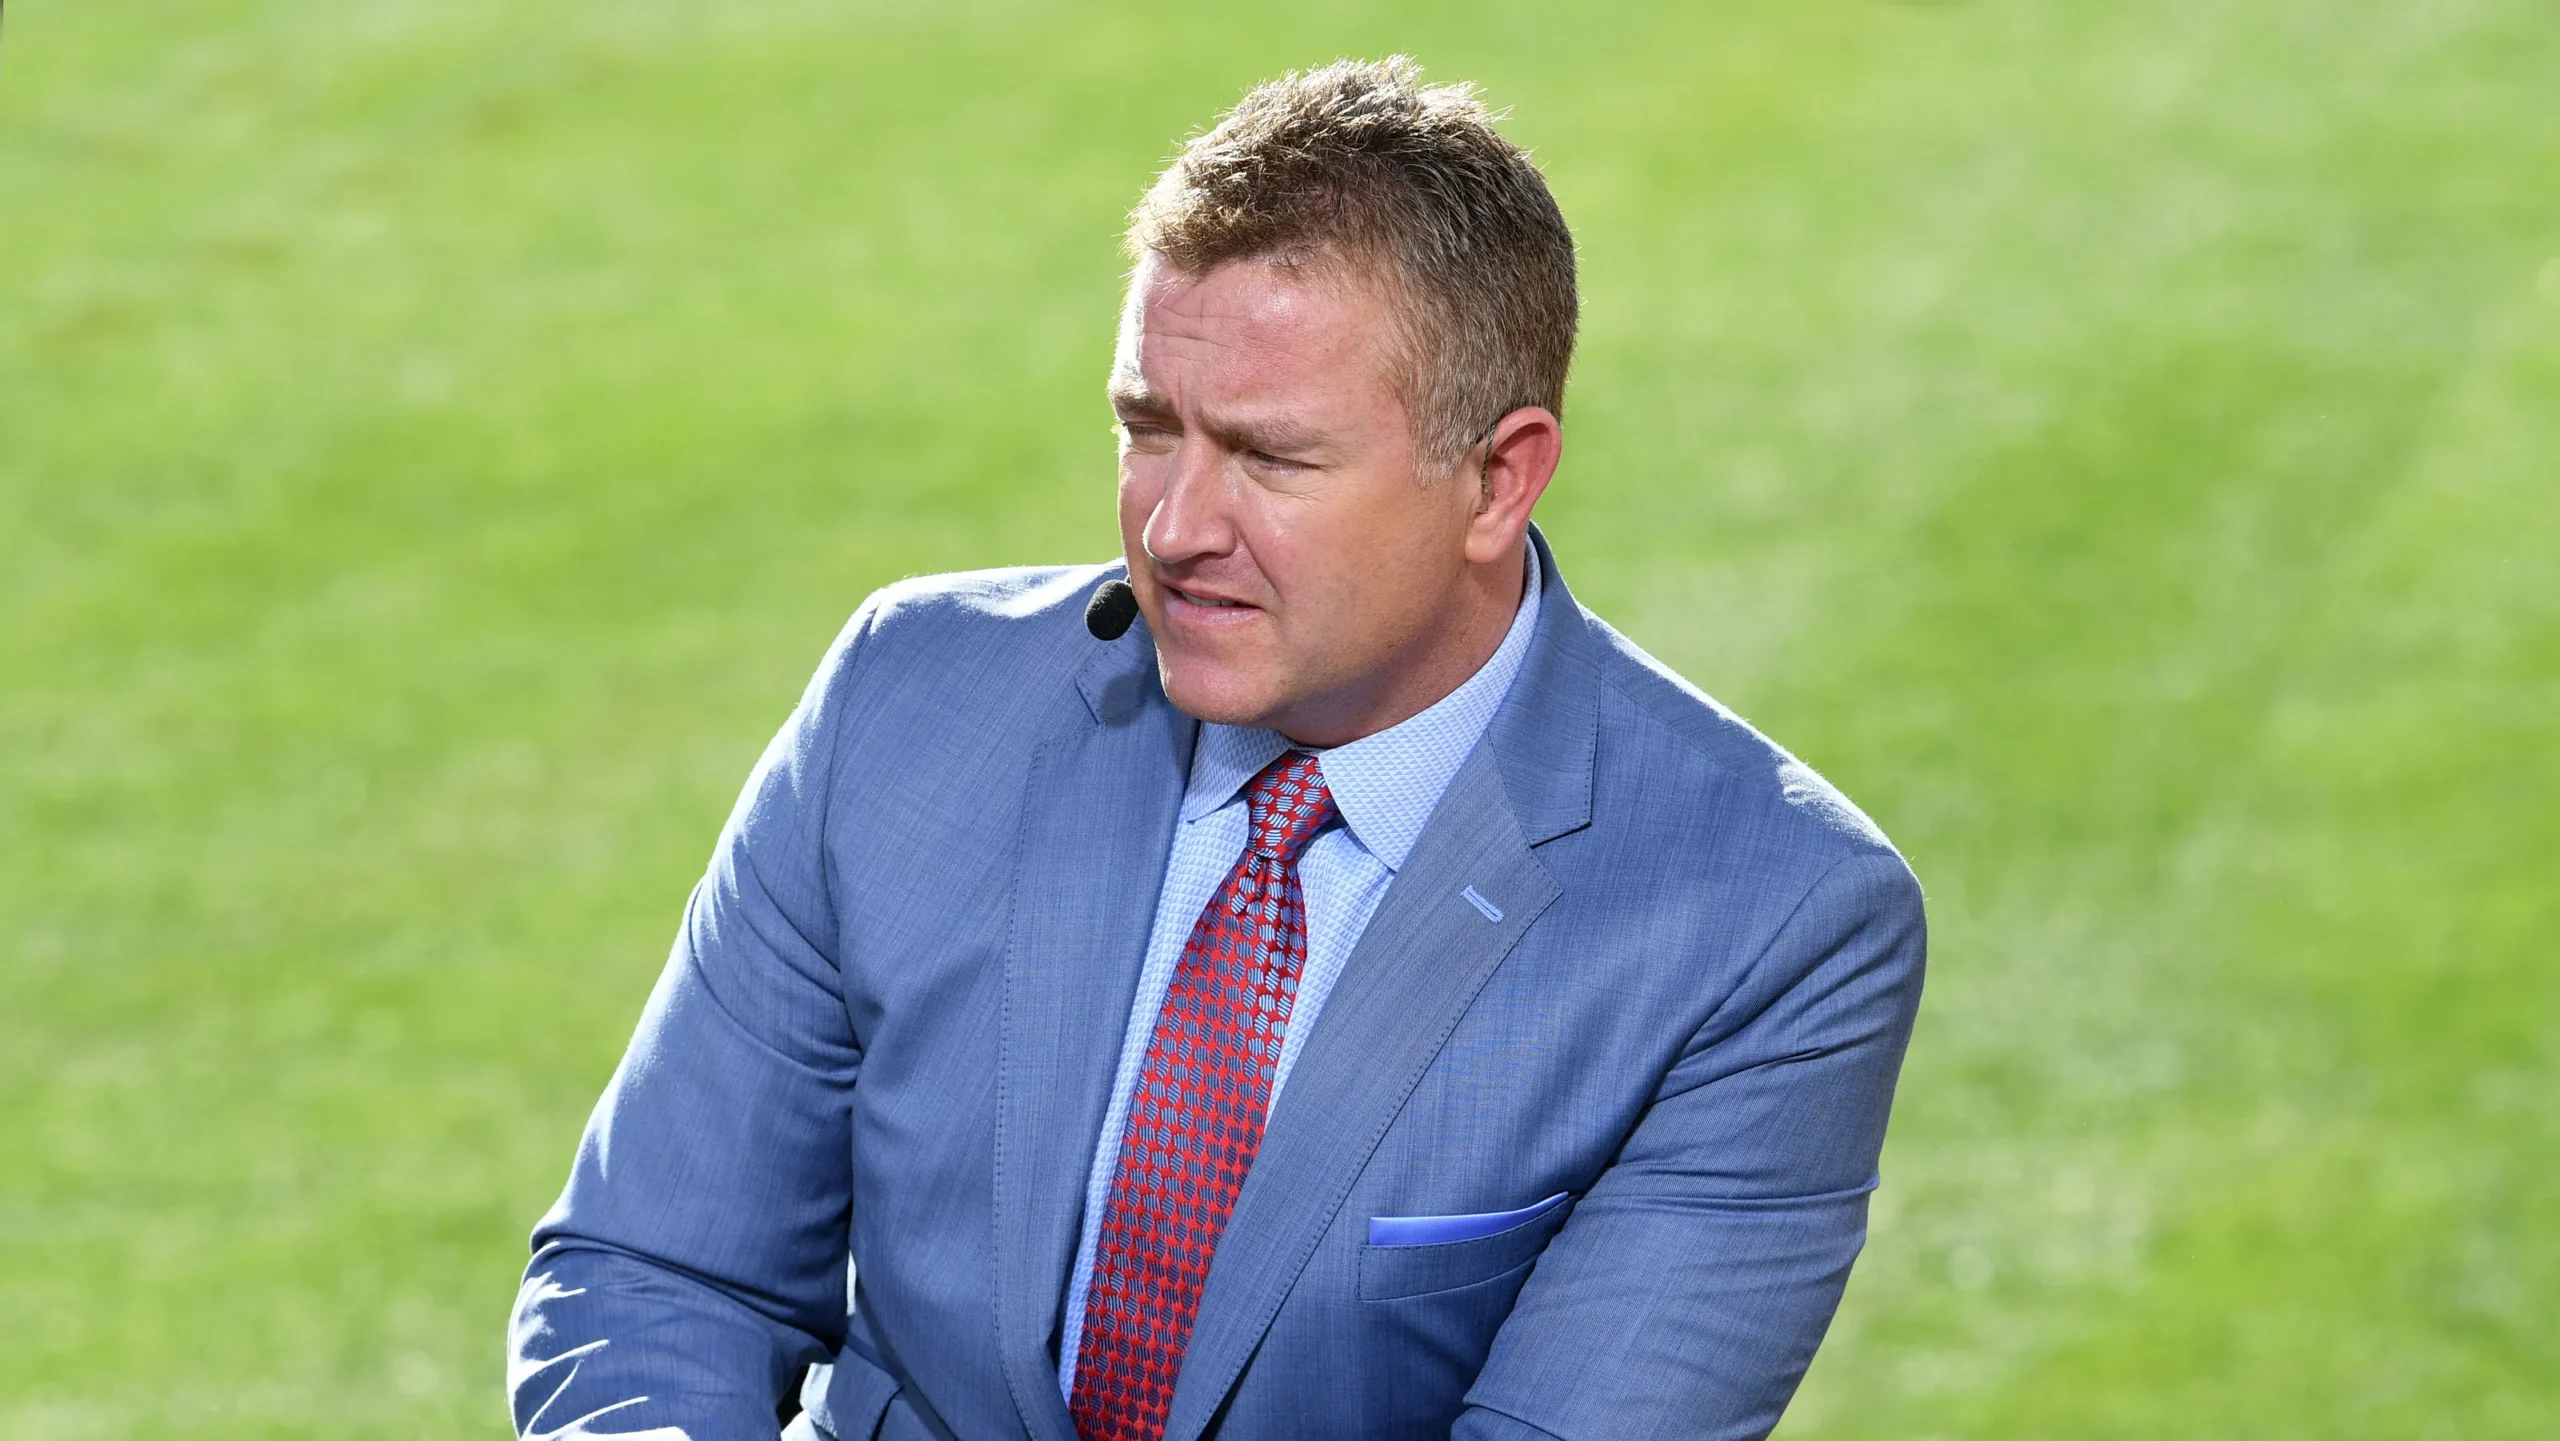 Did Kirk Herbstreit Have Plastic Surgery